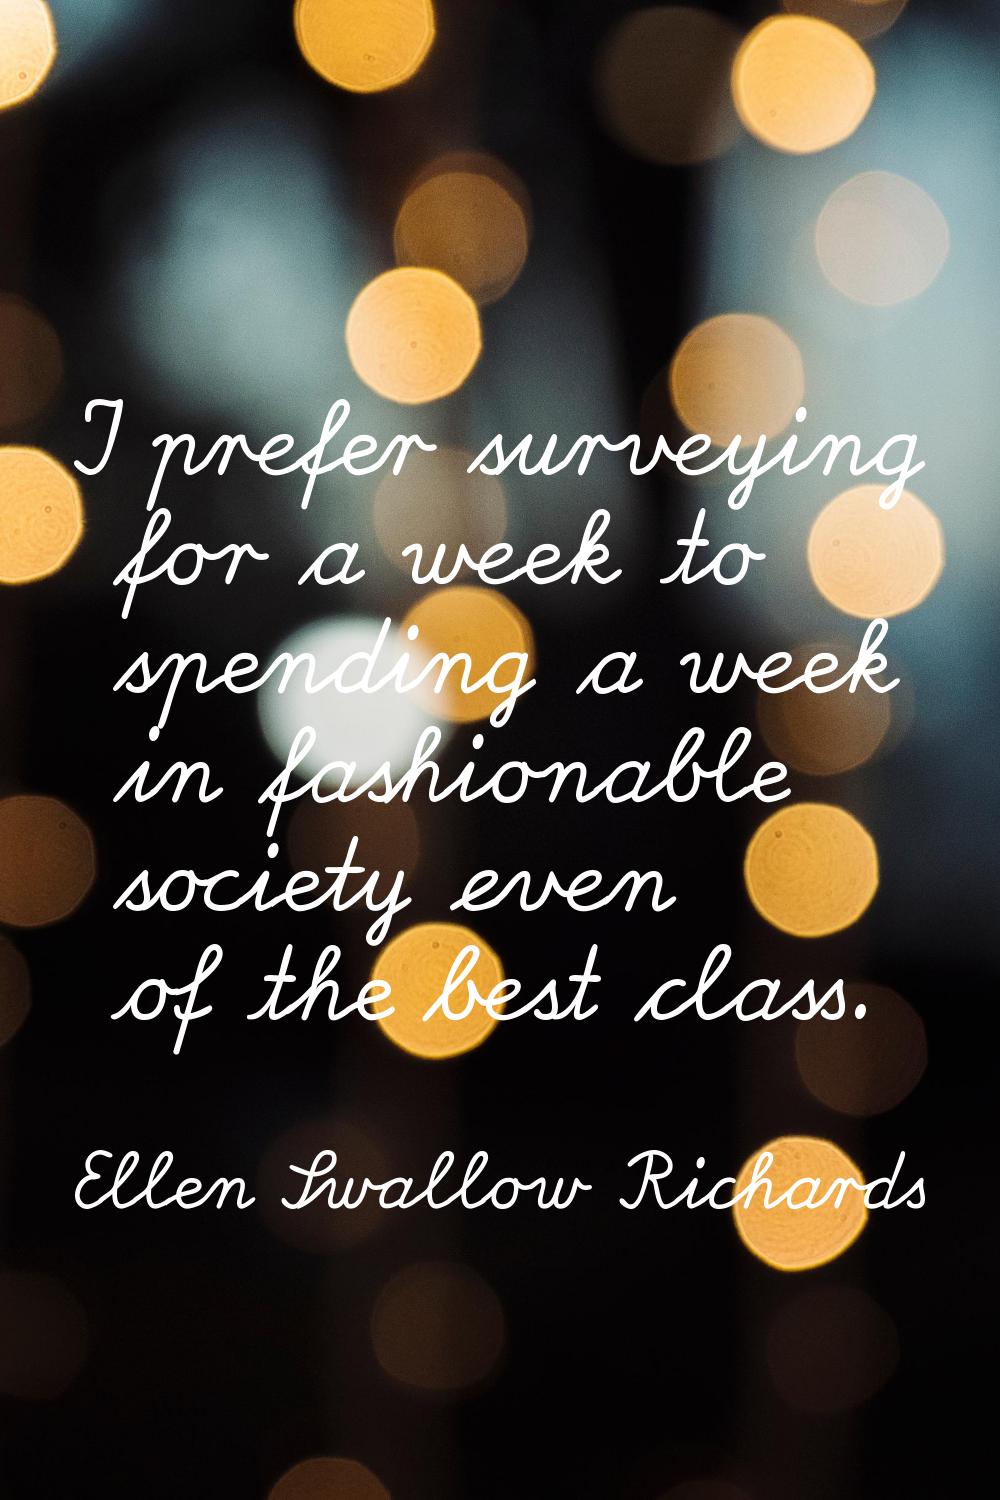 I prefer surveying for a week to spending a week in fashionable society even of the best class.